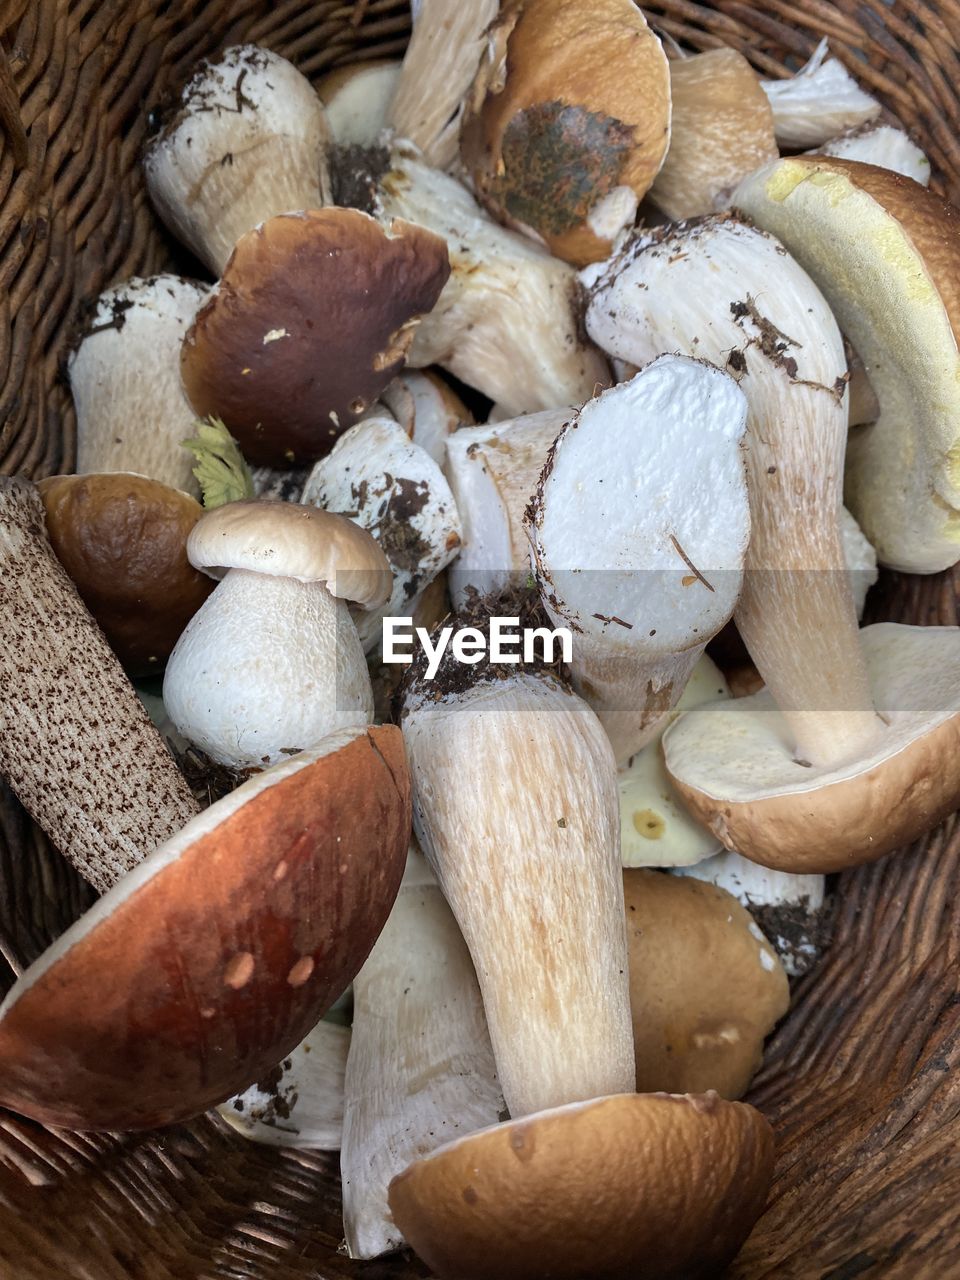 HIGH ANGLE VIEW OF MUSHROOMS IN WICKER BASKET